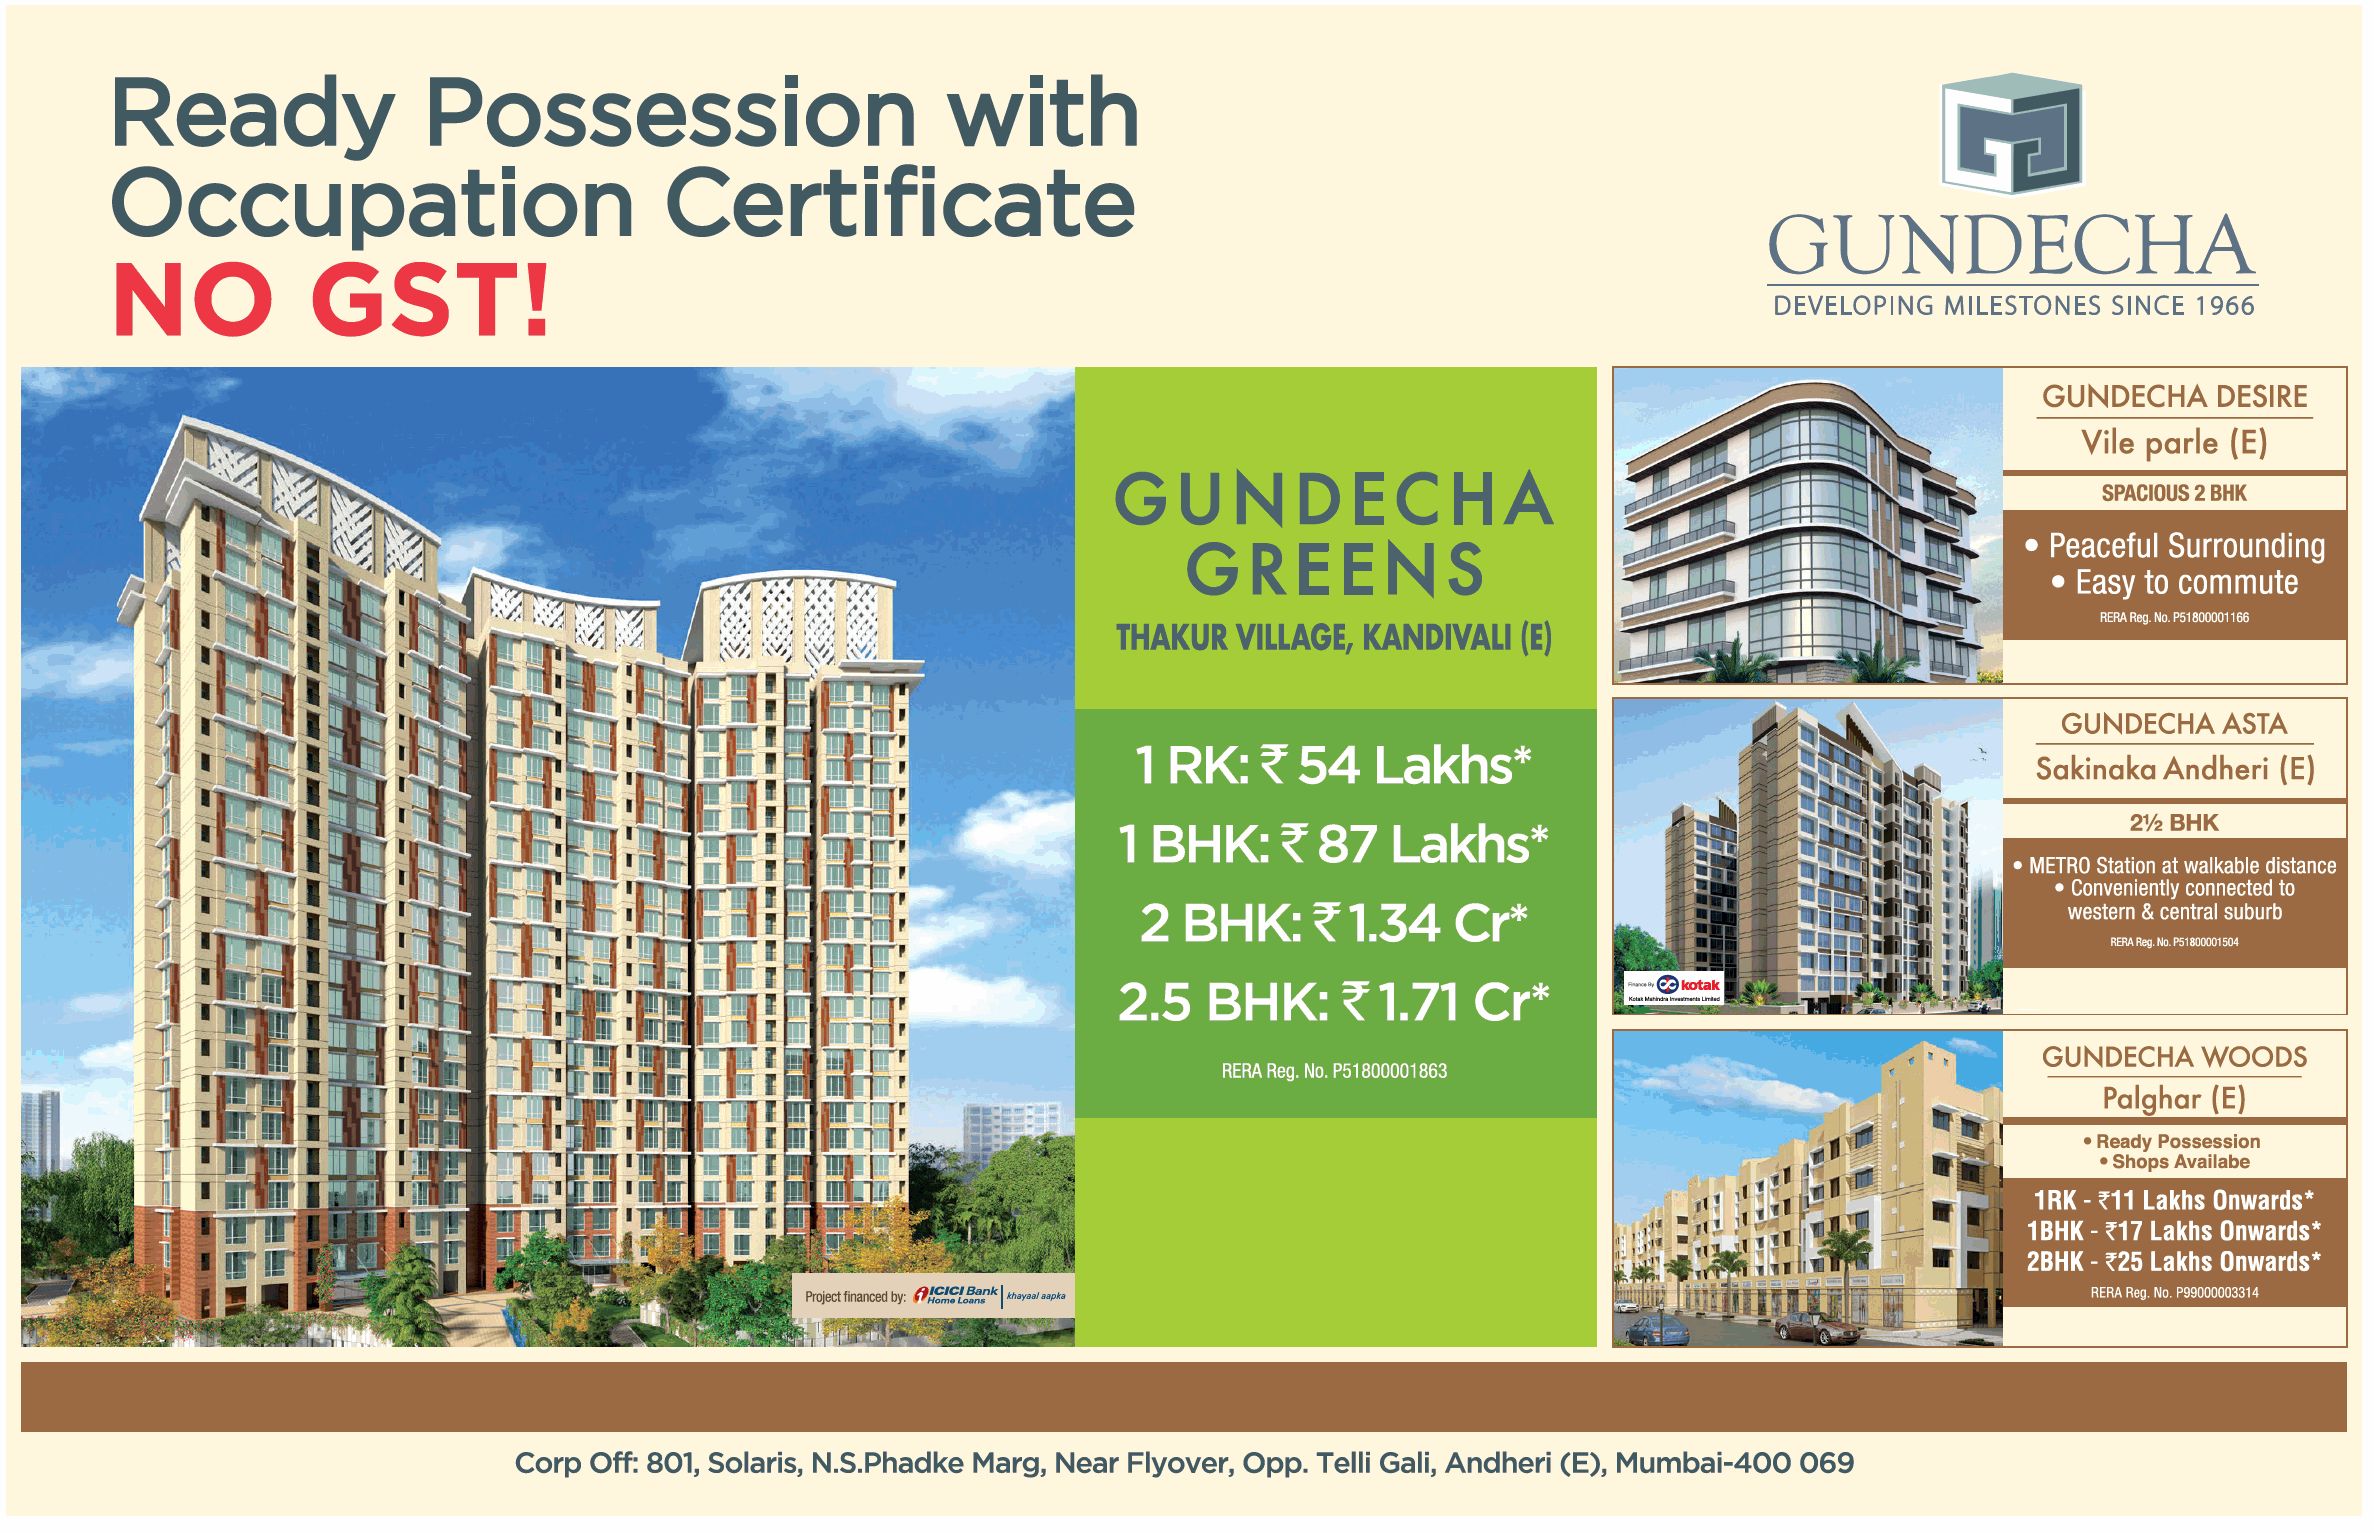 Ready possession with occupation certificate, No GST at Gundecha Group, Mumbai Update